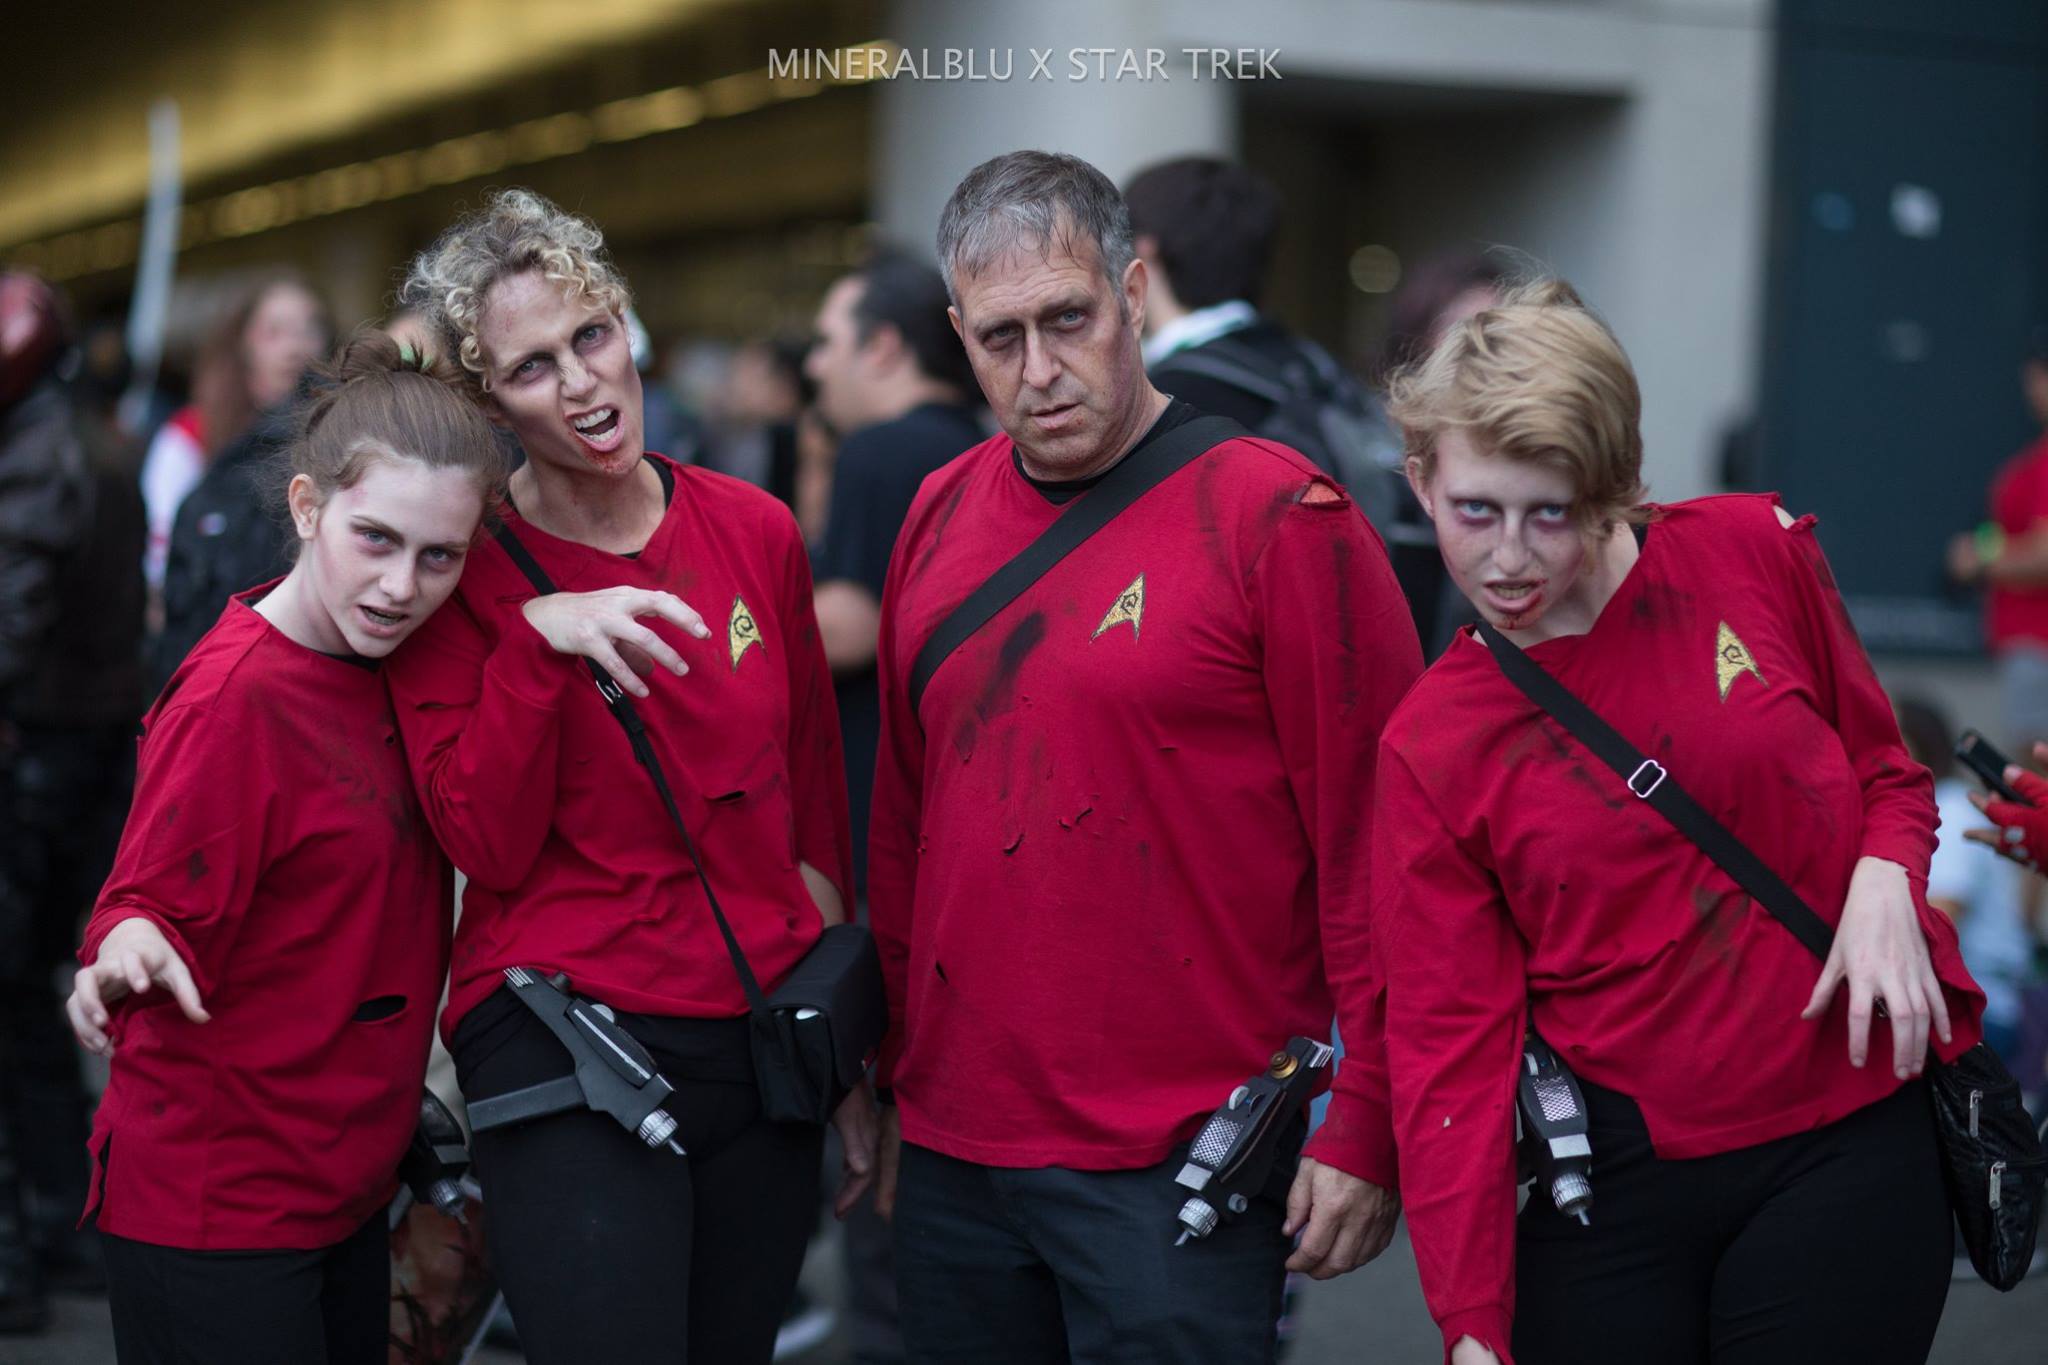 The Best Cosplay From New York Comic Con